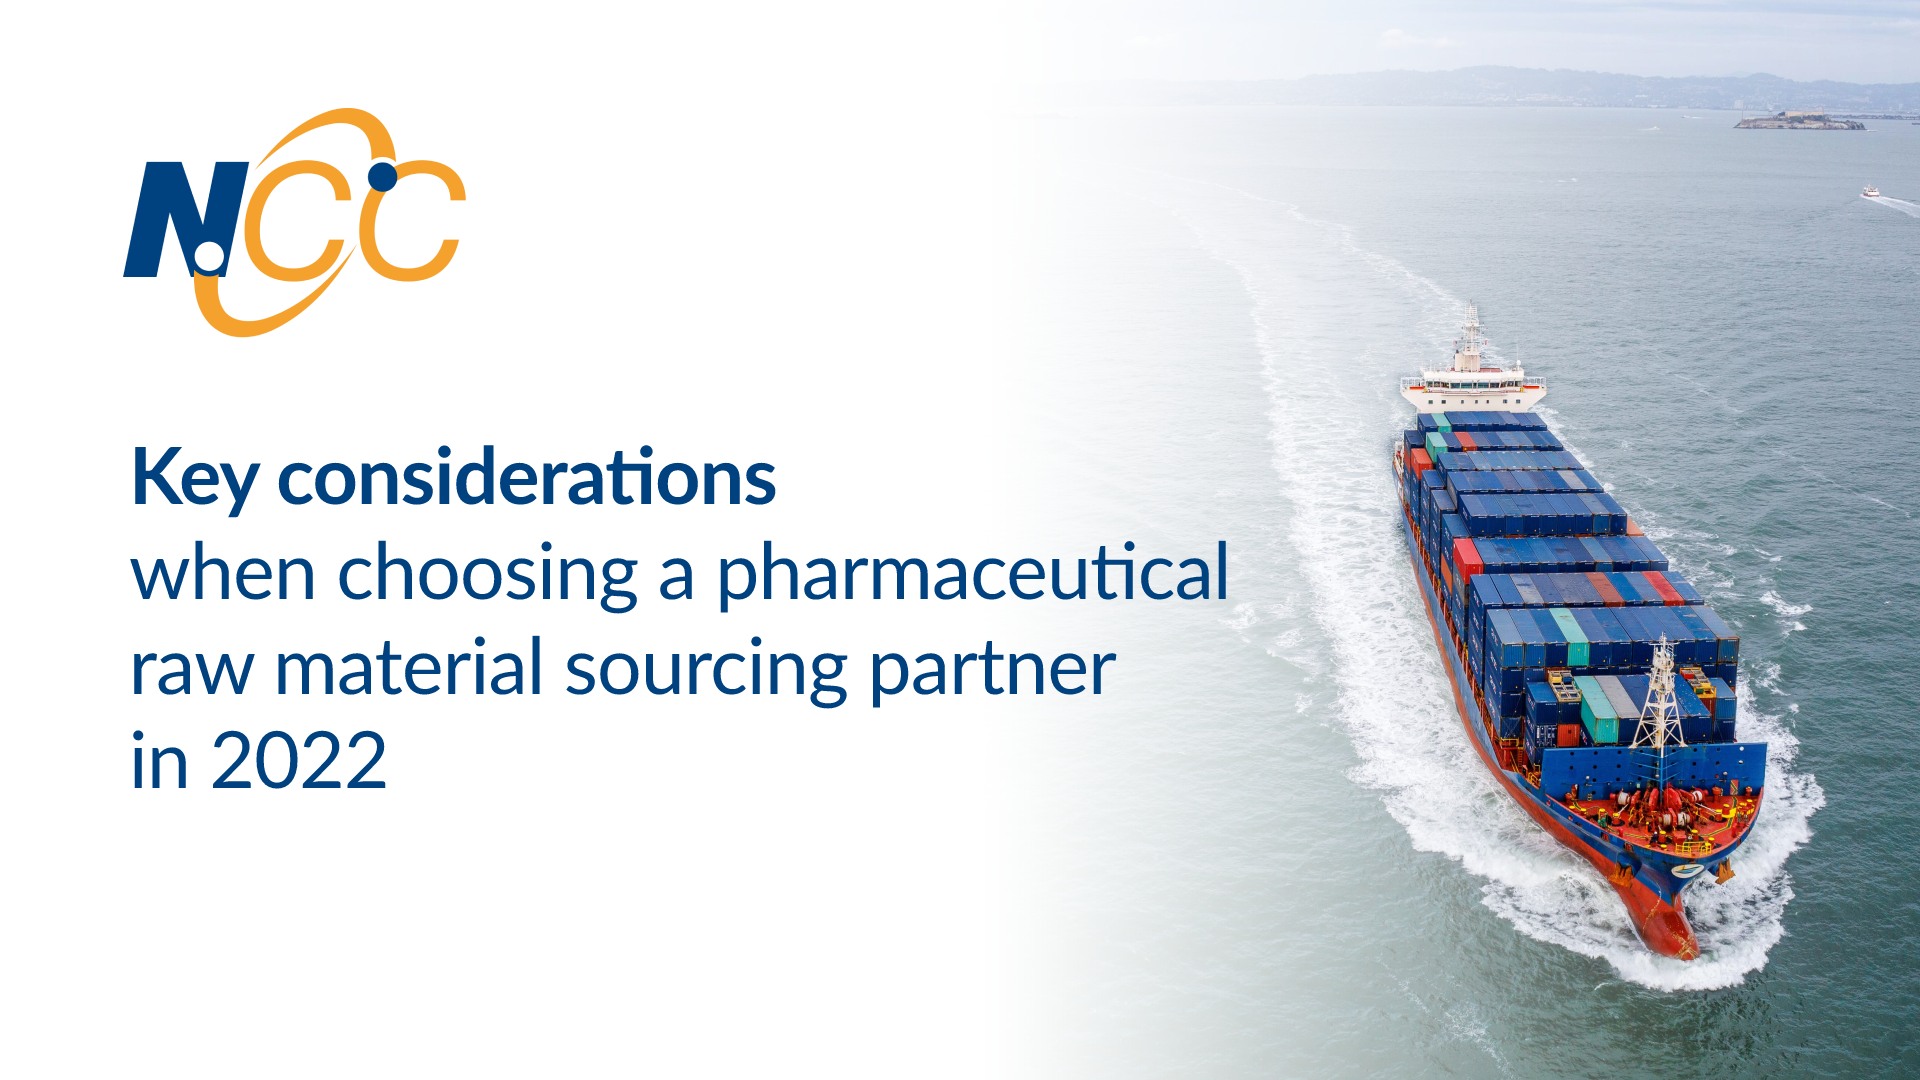 Key considerations when choosing a pharmaceutical raw material sourcing partner in 2022